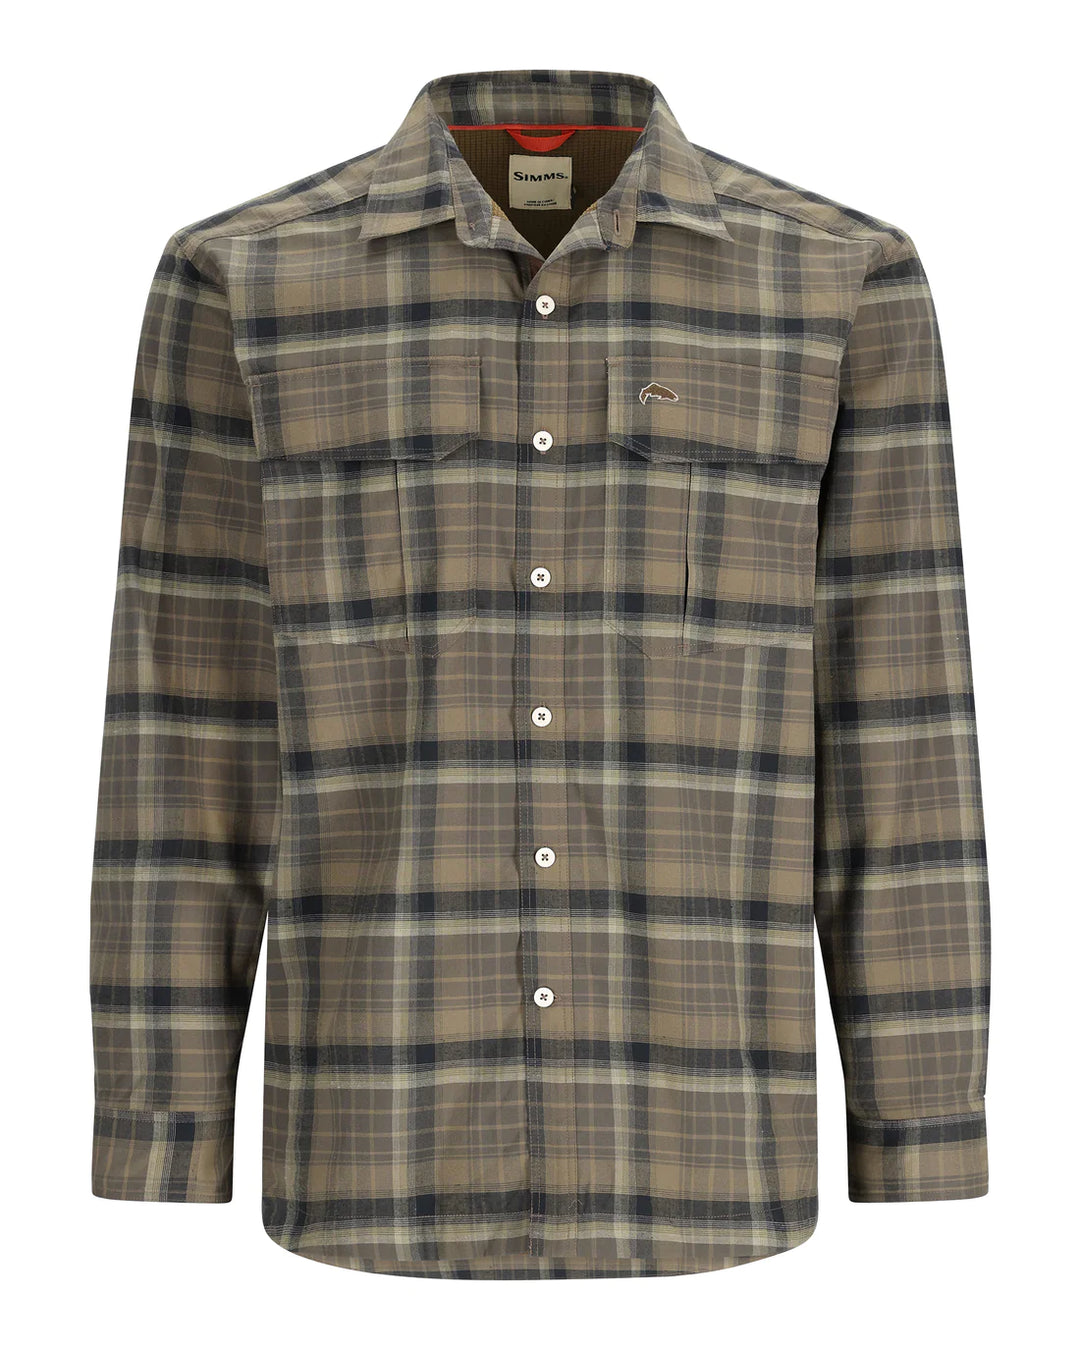 Simms - M's ColdWeather Shirt - Hickory Asym Ombre Plaid